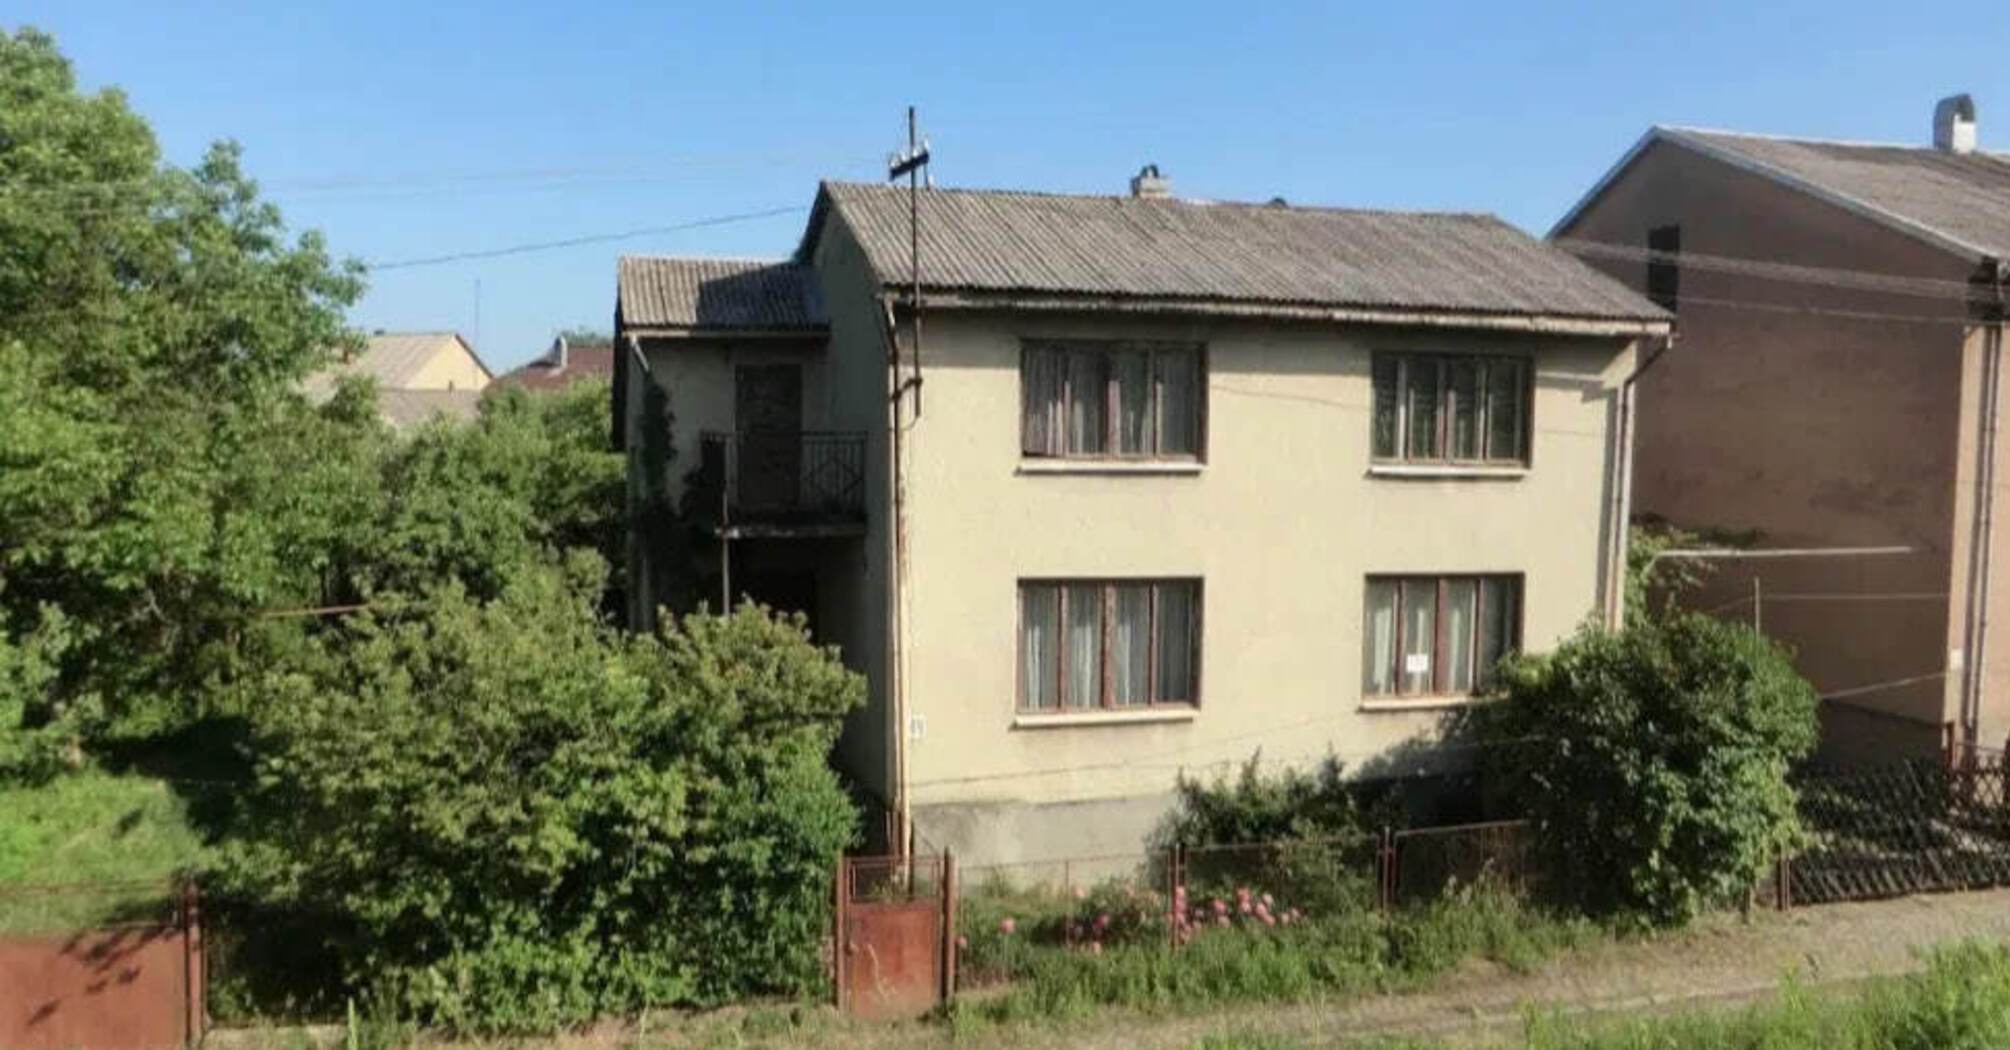 A house for sale in Transcarpathia near the Tisza river on the border with Romania